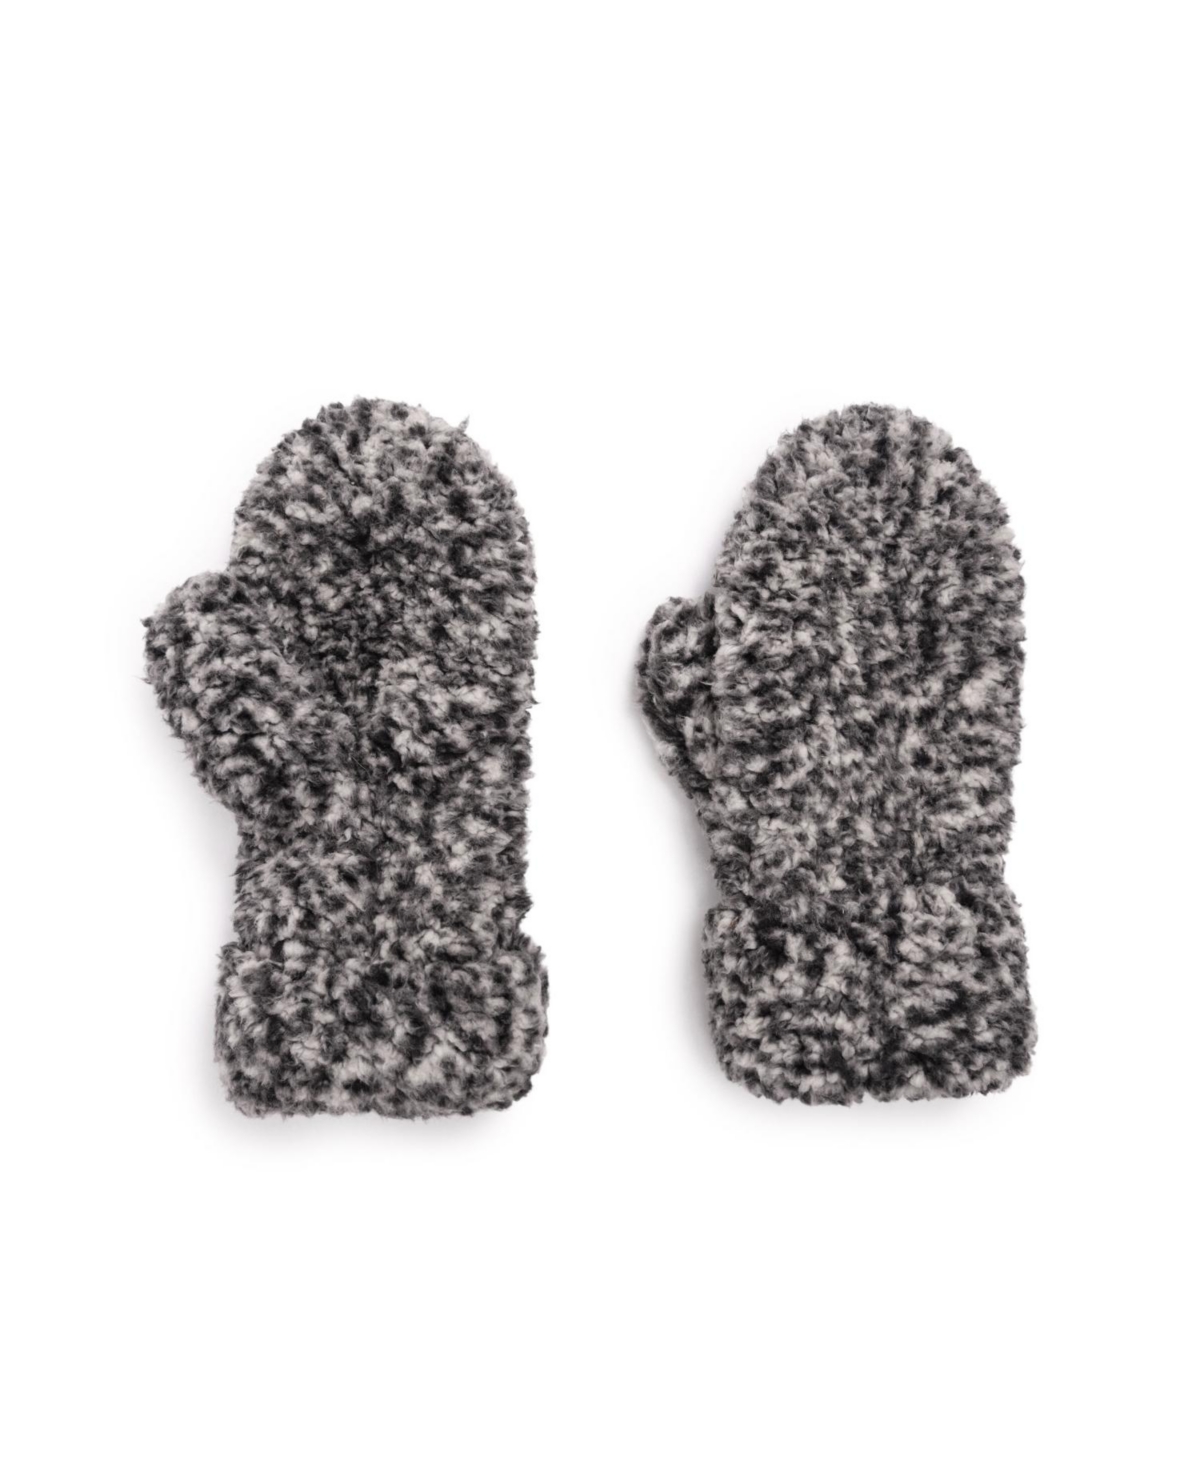 Women's Sherpa Mitten Gloves, Frosted Black, One Size - Frosted black